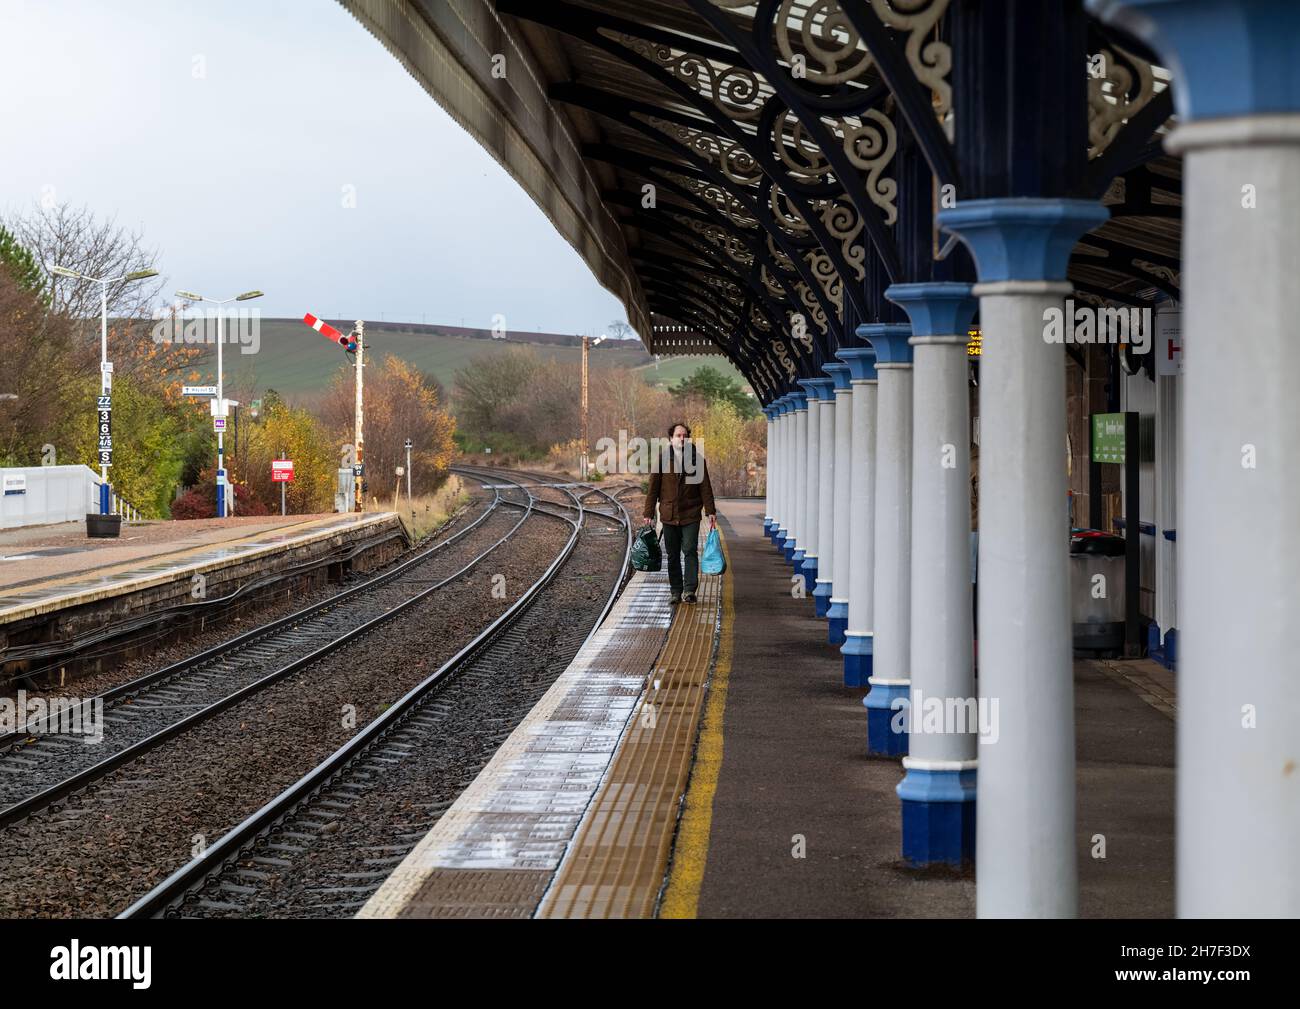 STONEHAVEN, ABERDEENSHIRE, SCOTLAND - 21 NOVEMBER 2021: This is a view on the sothbound platform of the Railway Station at Stonehaven, Aberdeenshire, Stock Photo